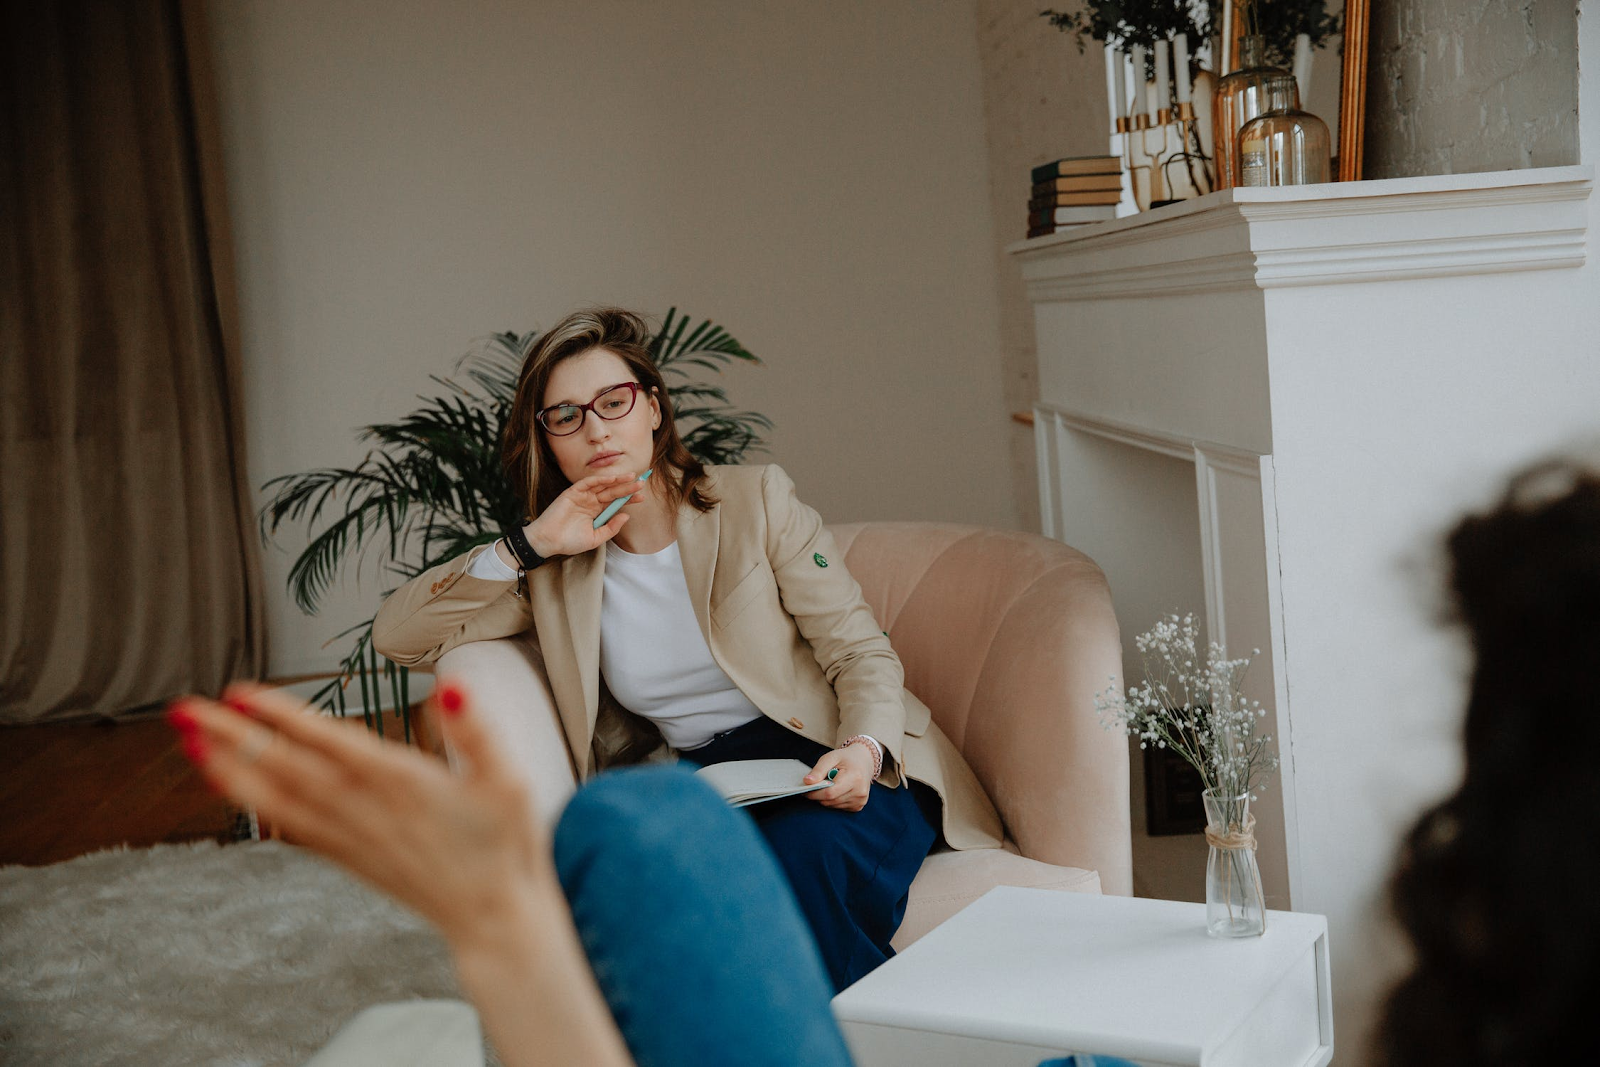 An image of a therapist sitting in a chair, listening and taking notes while her client speaks.